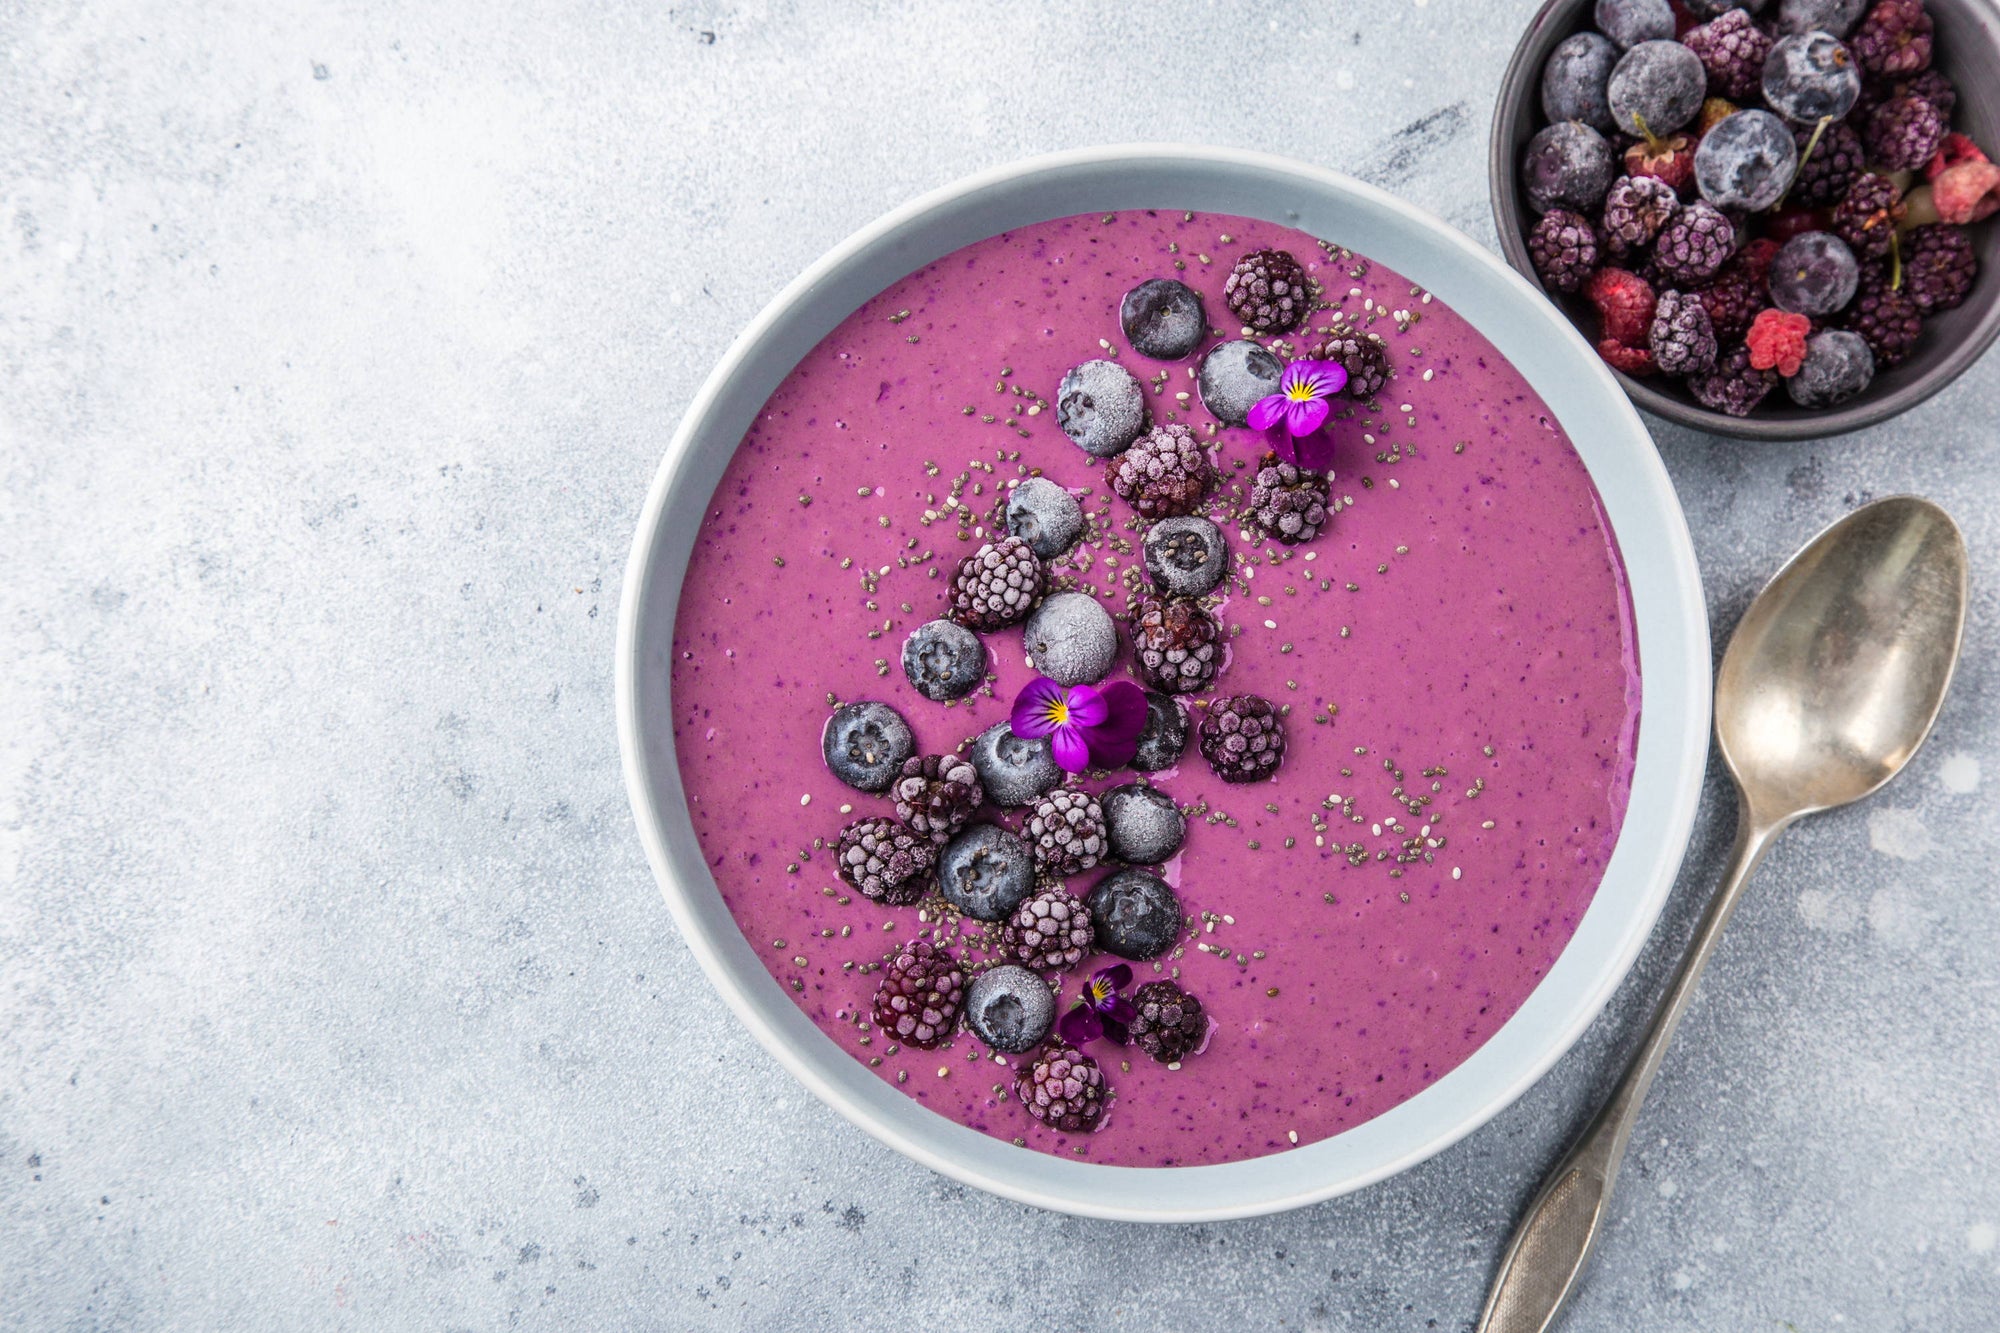 Un-beet-lievable Fall Beet Smoothie Bowl